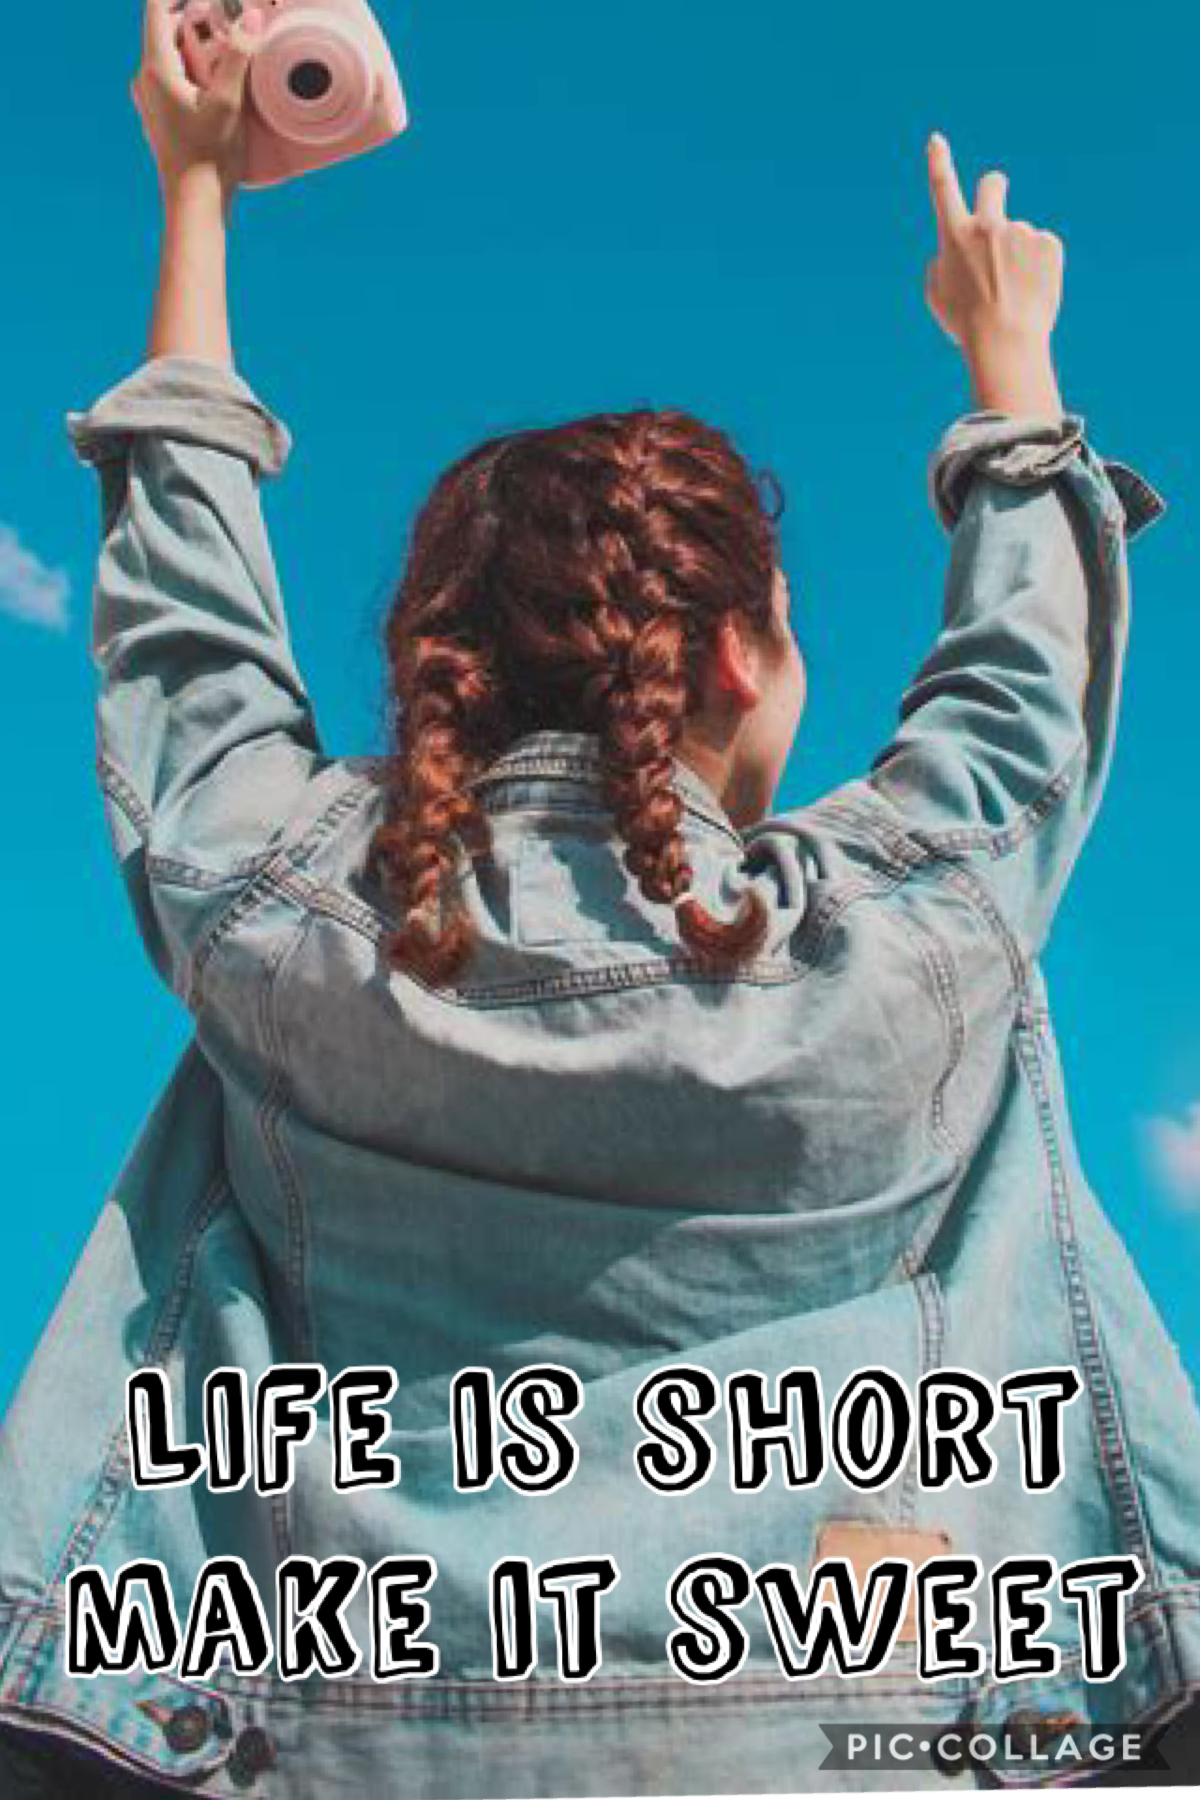 Life is short make it sweet tell me what you think in the comments below I want to see yawls remixes